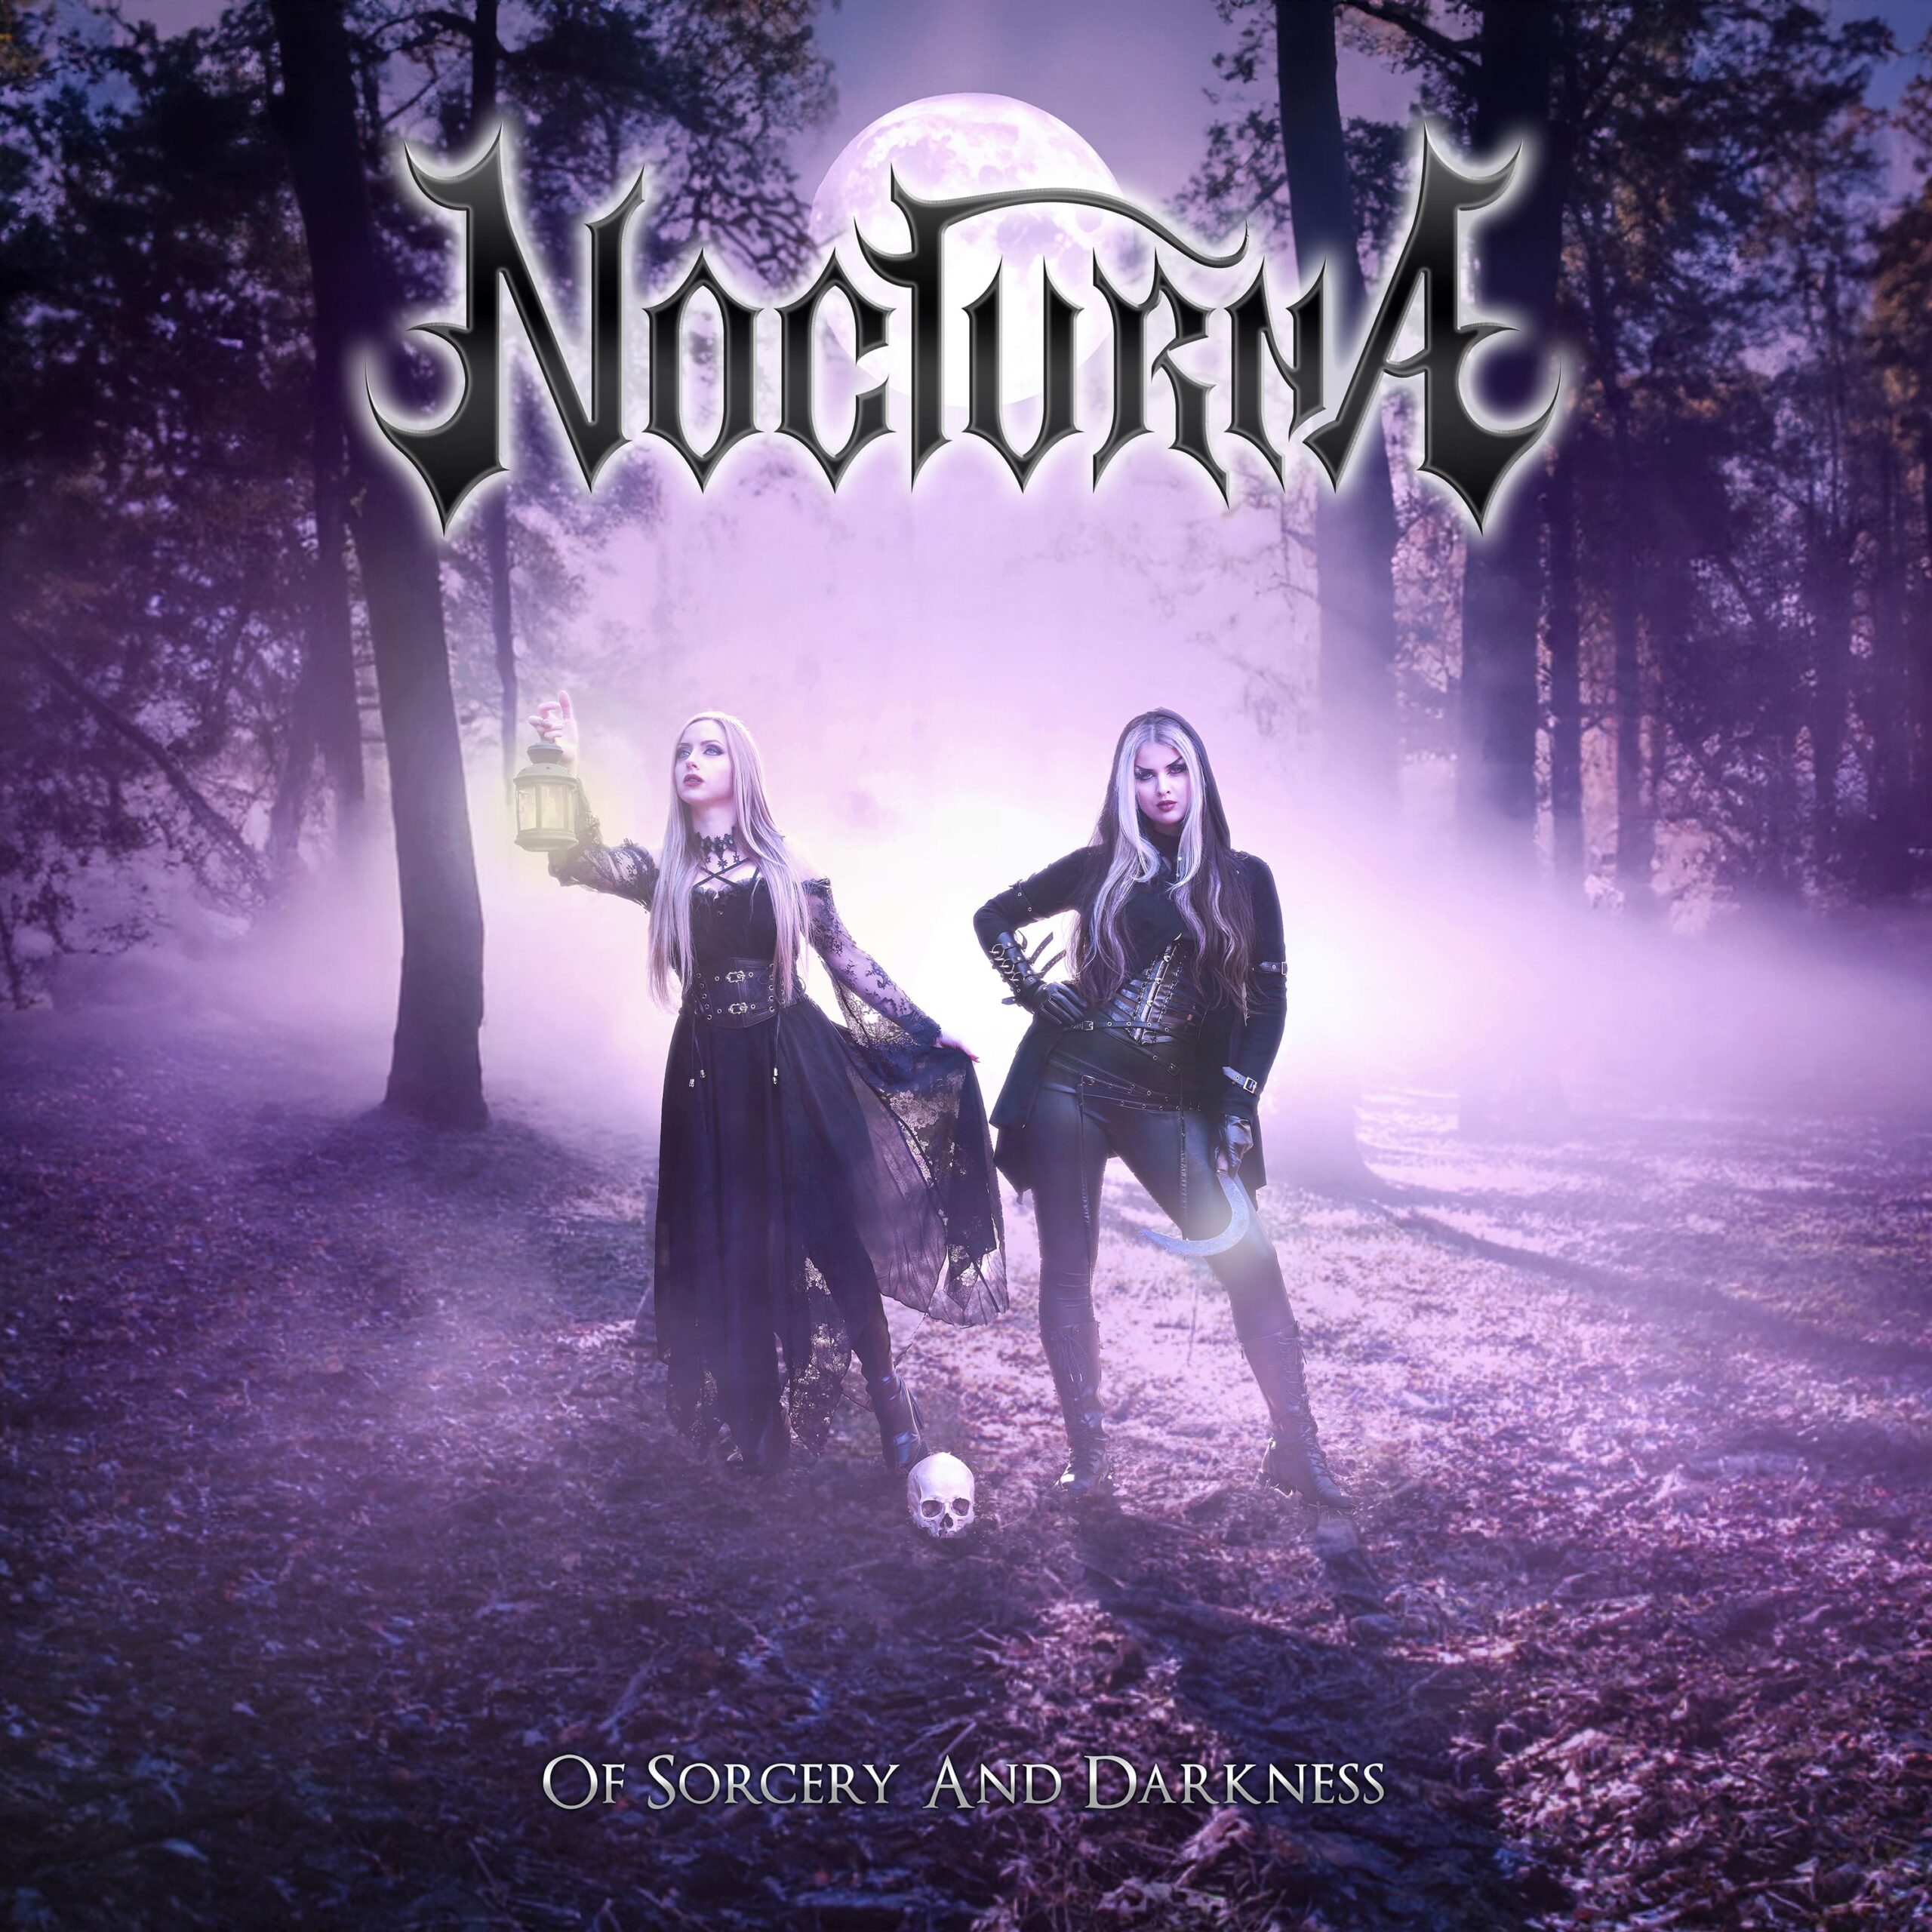 Nocturna releases “Strangers” video